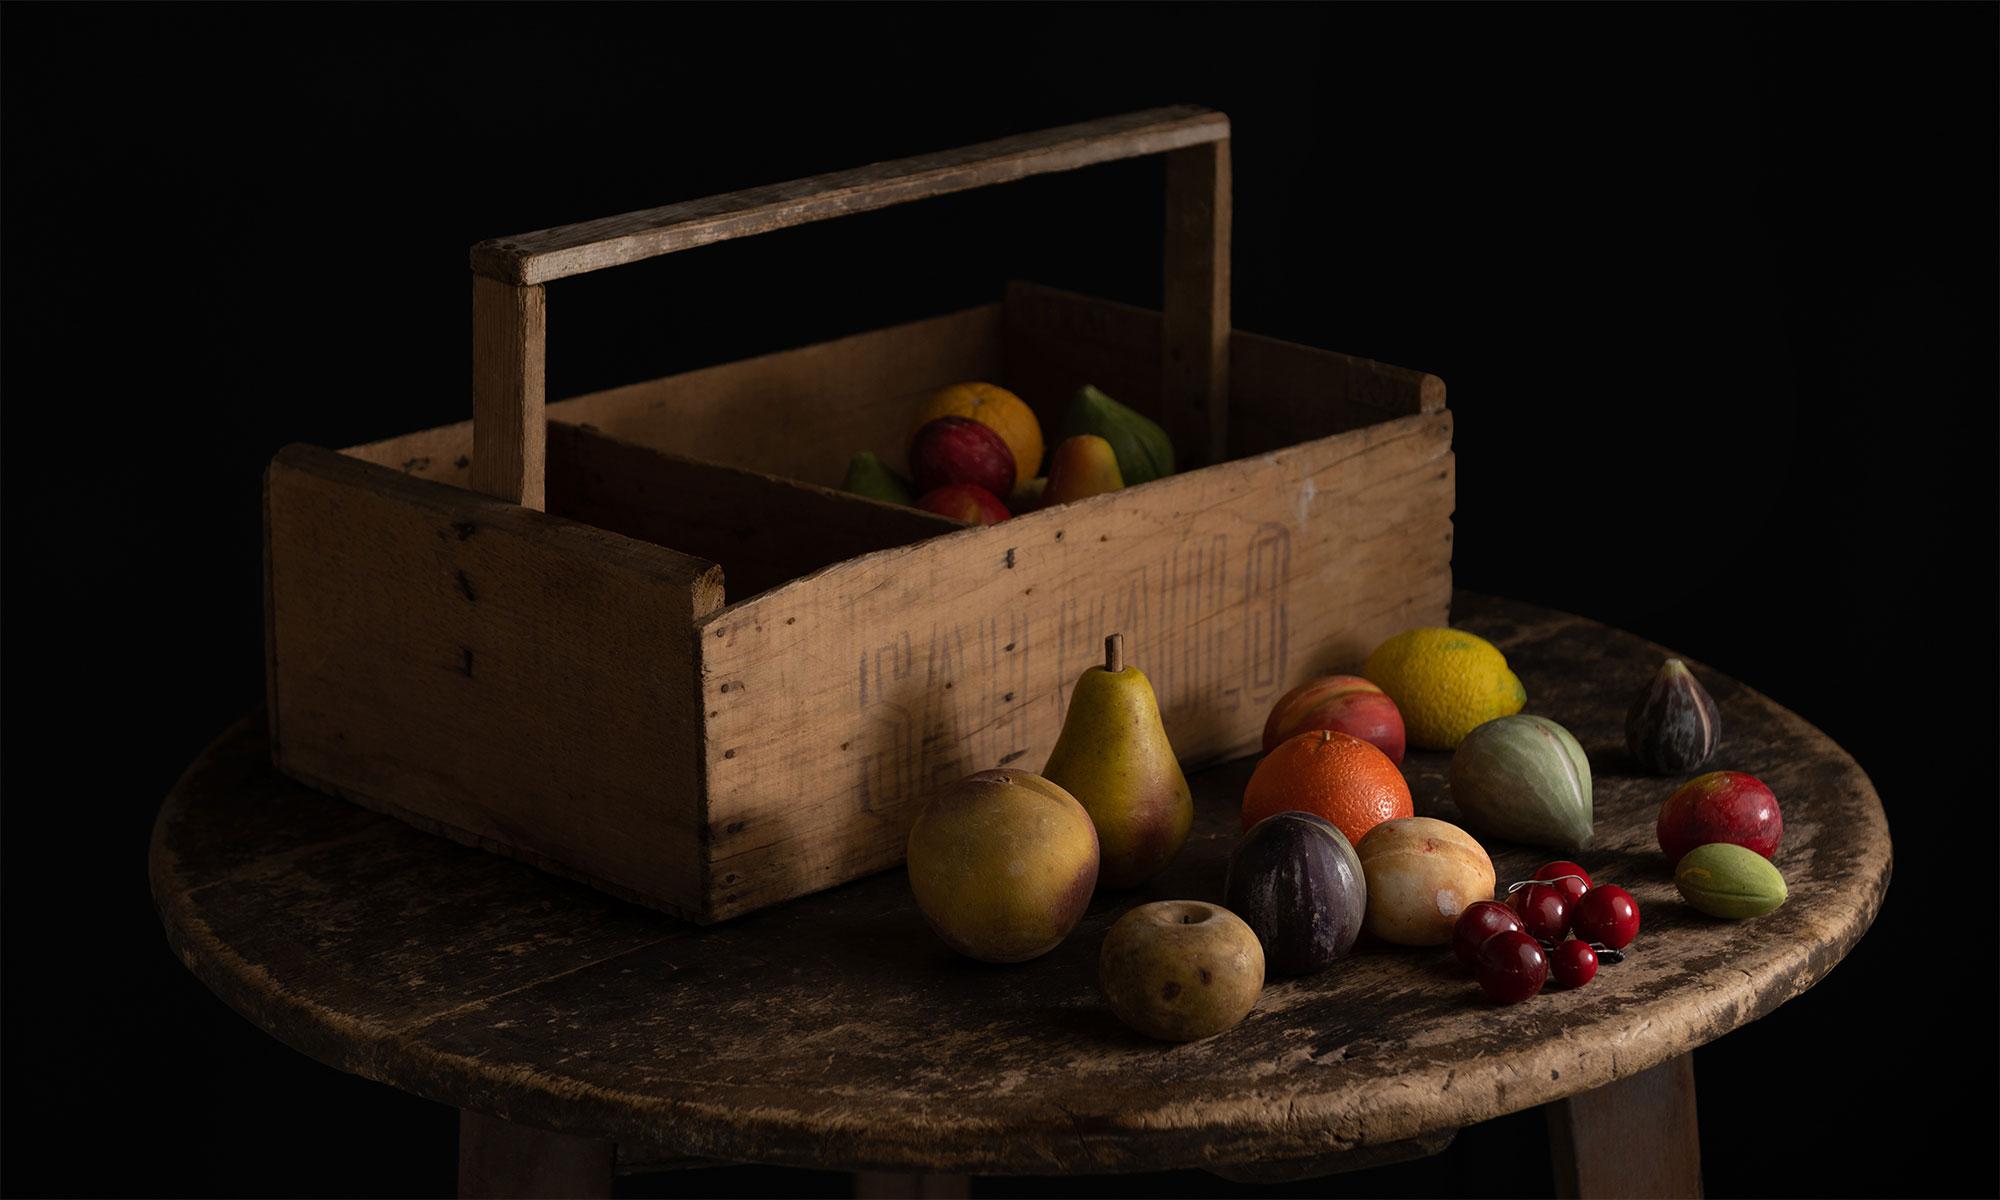 Collection of ( 45 ) Hand Painted Marble Fruit with Wooden Carrier

Italy Circa 1950

Beautiful collection of tromp l'oeil fruit in a vintage fruit basket stamped Sao Paulo. 

The collection is comprised of 2 pears, 4 plums, 4 citrus fruits, 6